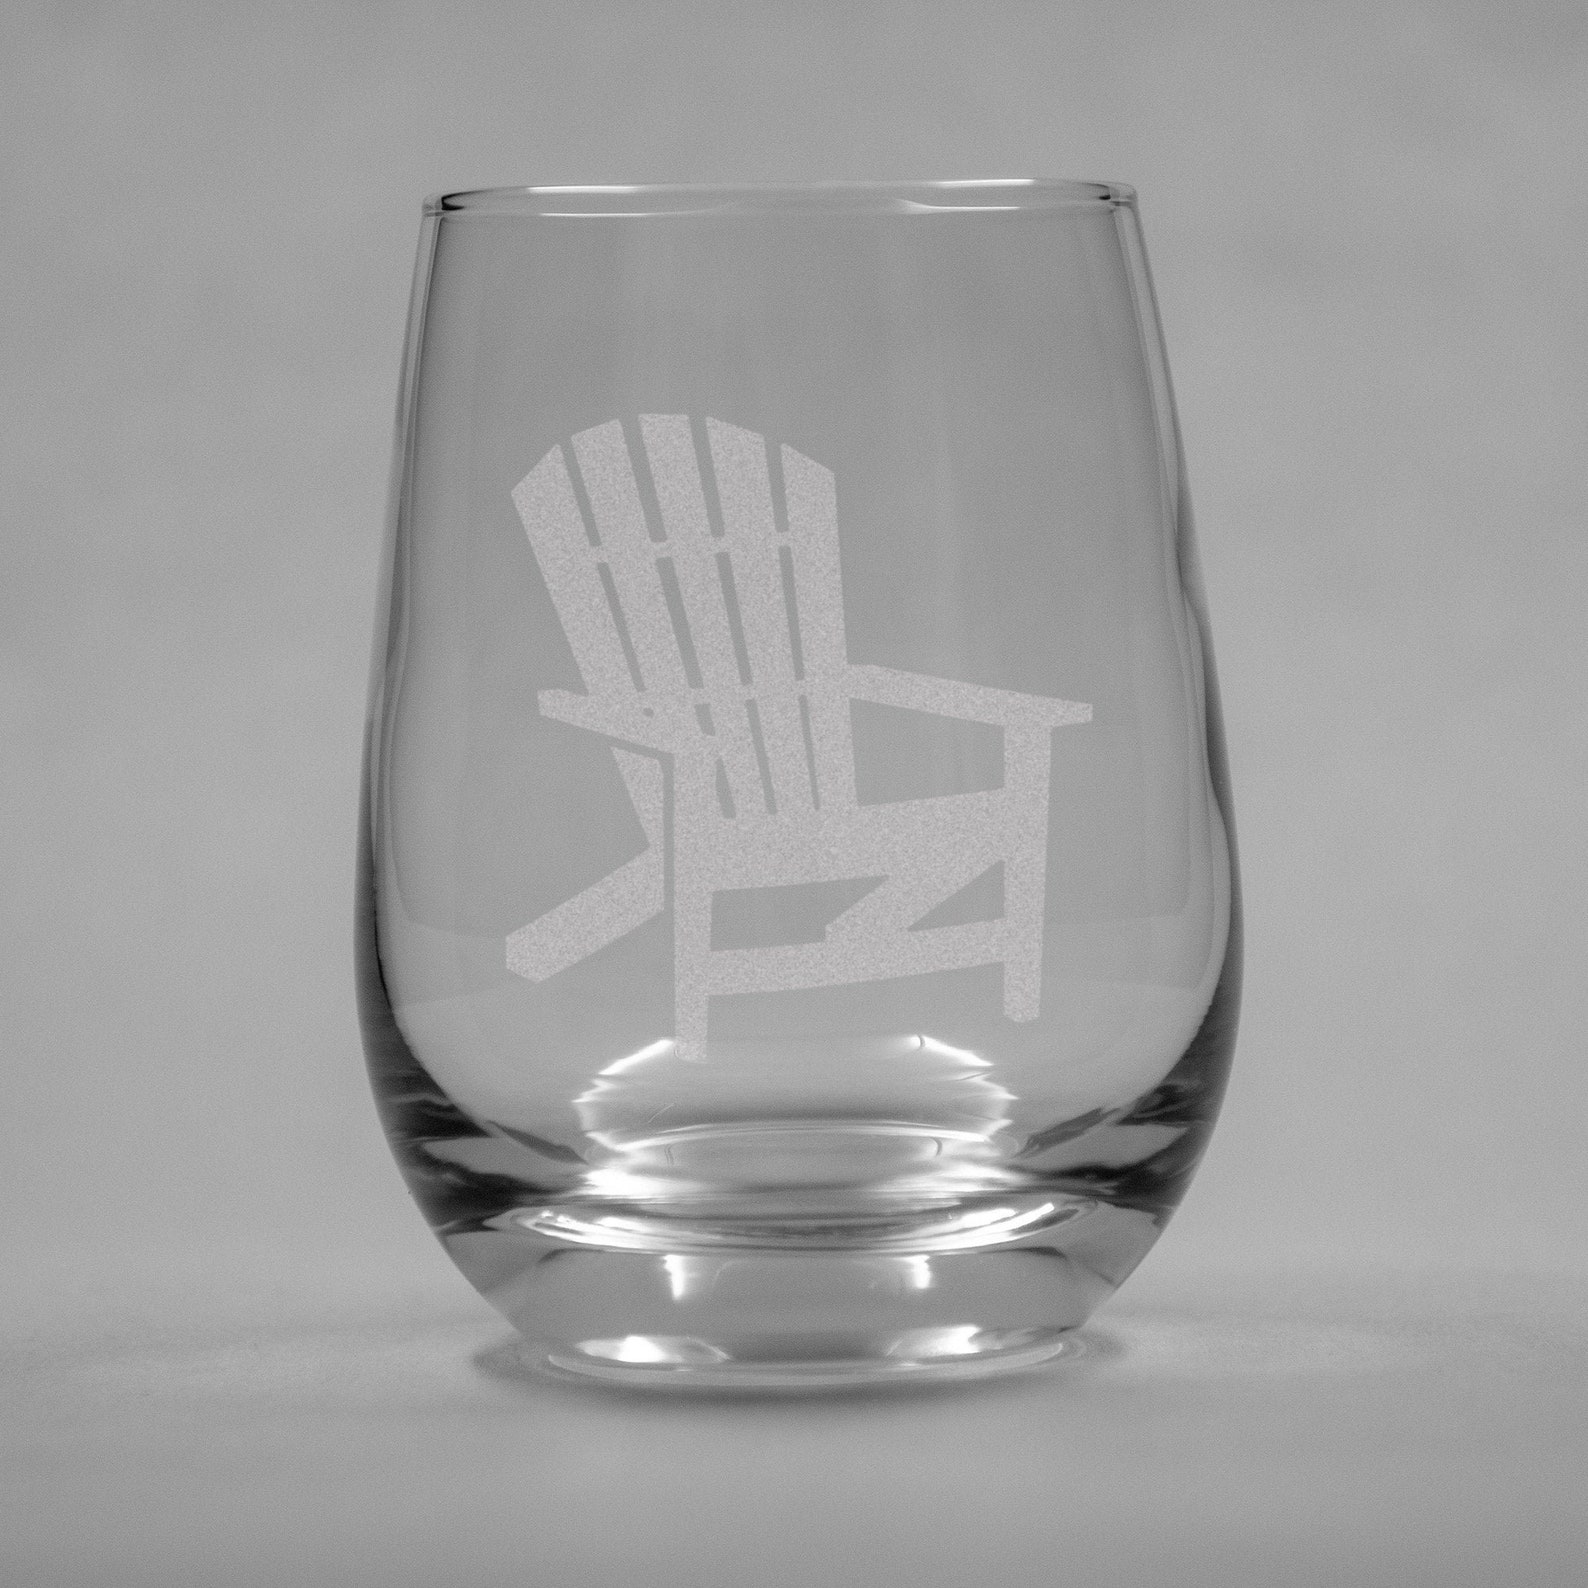 Adirondack Chair Etched Stemless Wine Glasses Set of 2 | Etsy